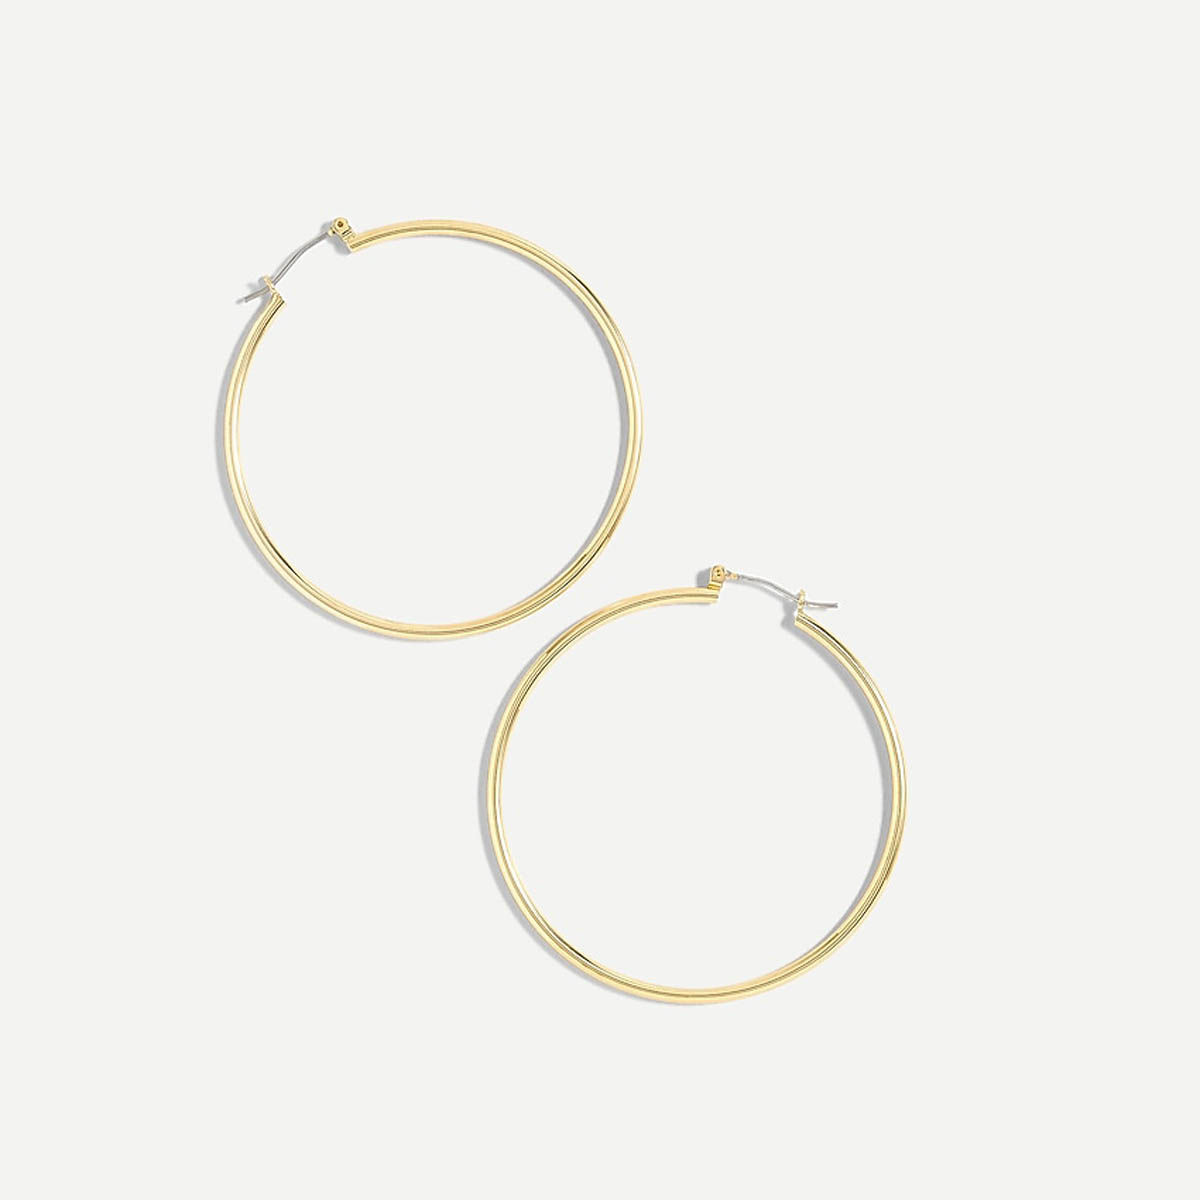 Accessory Staples Antique Gold Hoop Earrings